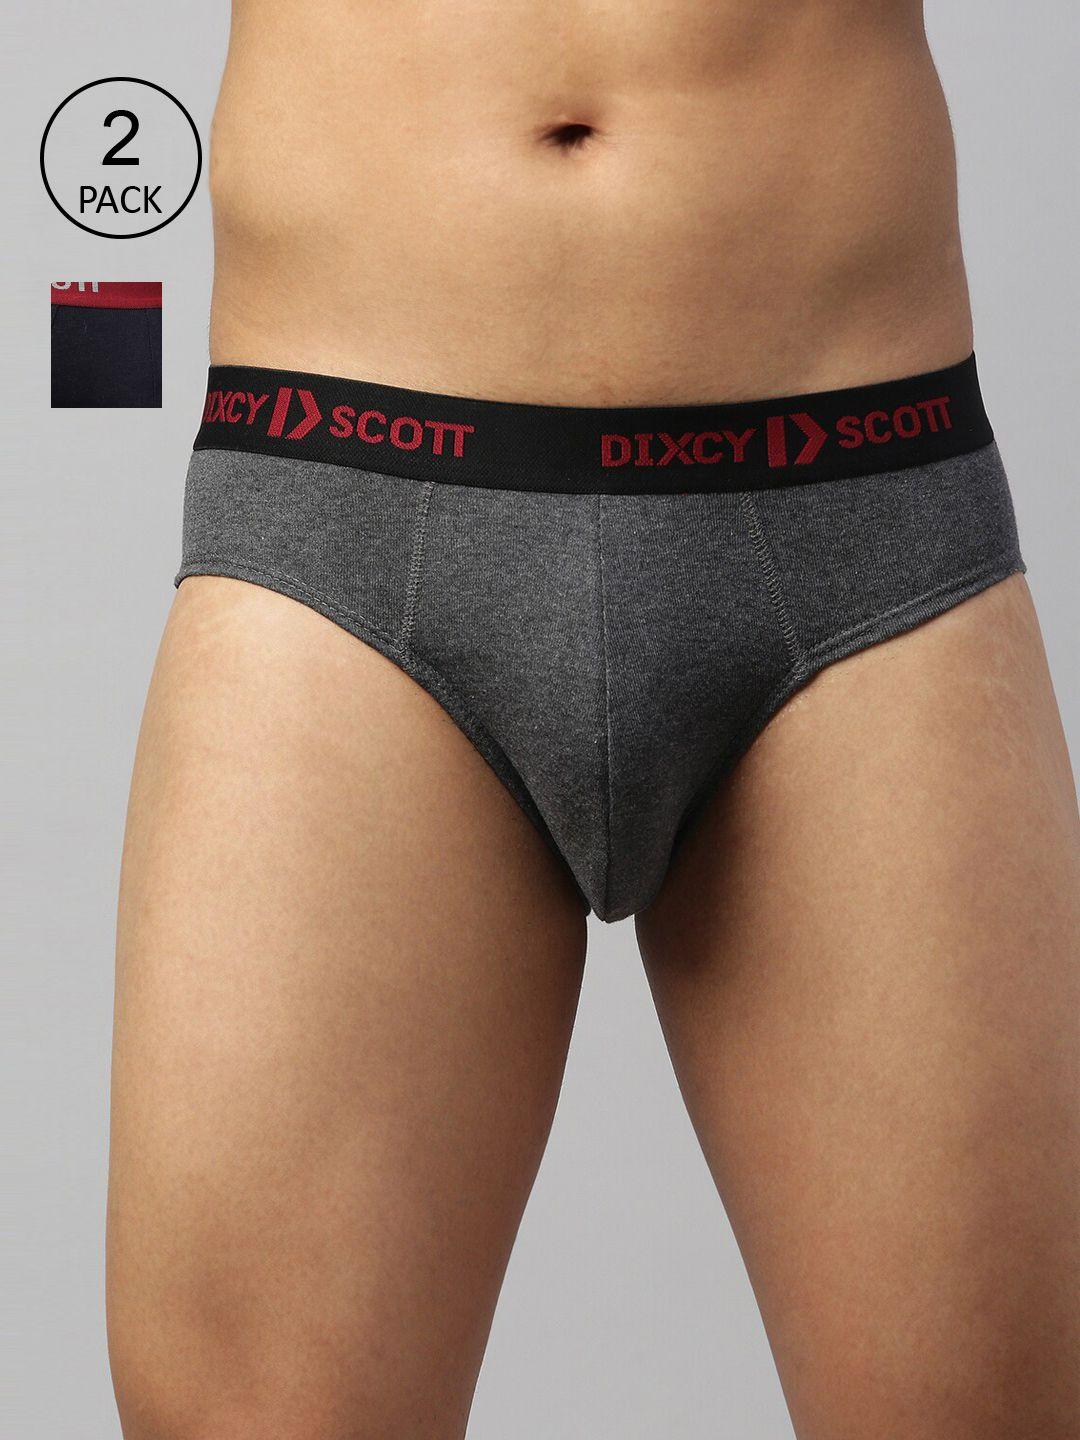 dixcy scott maximus men pack of 2 anti microbial pure cotton basic briefs